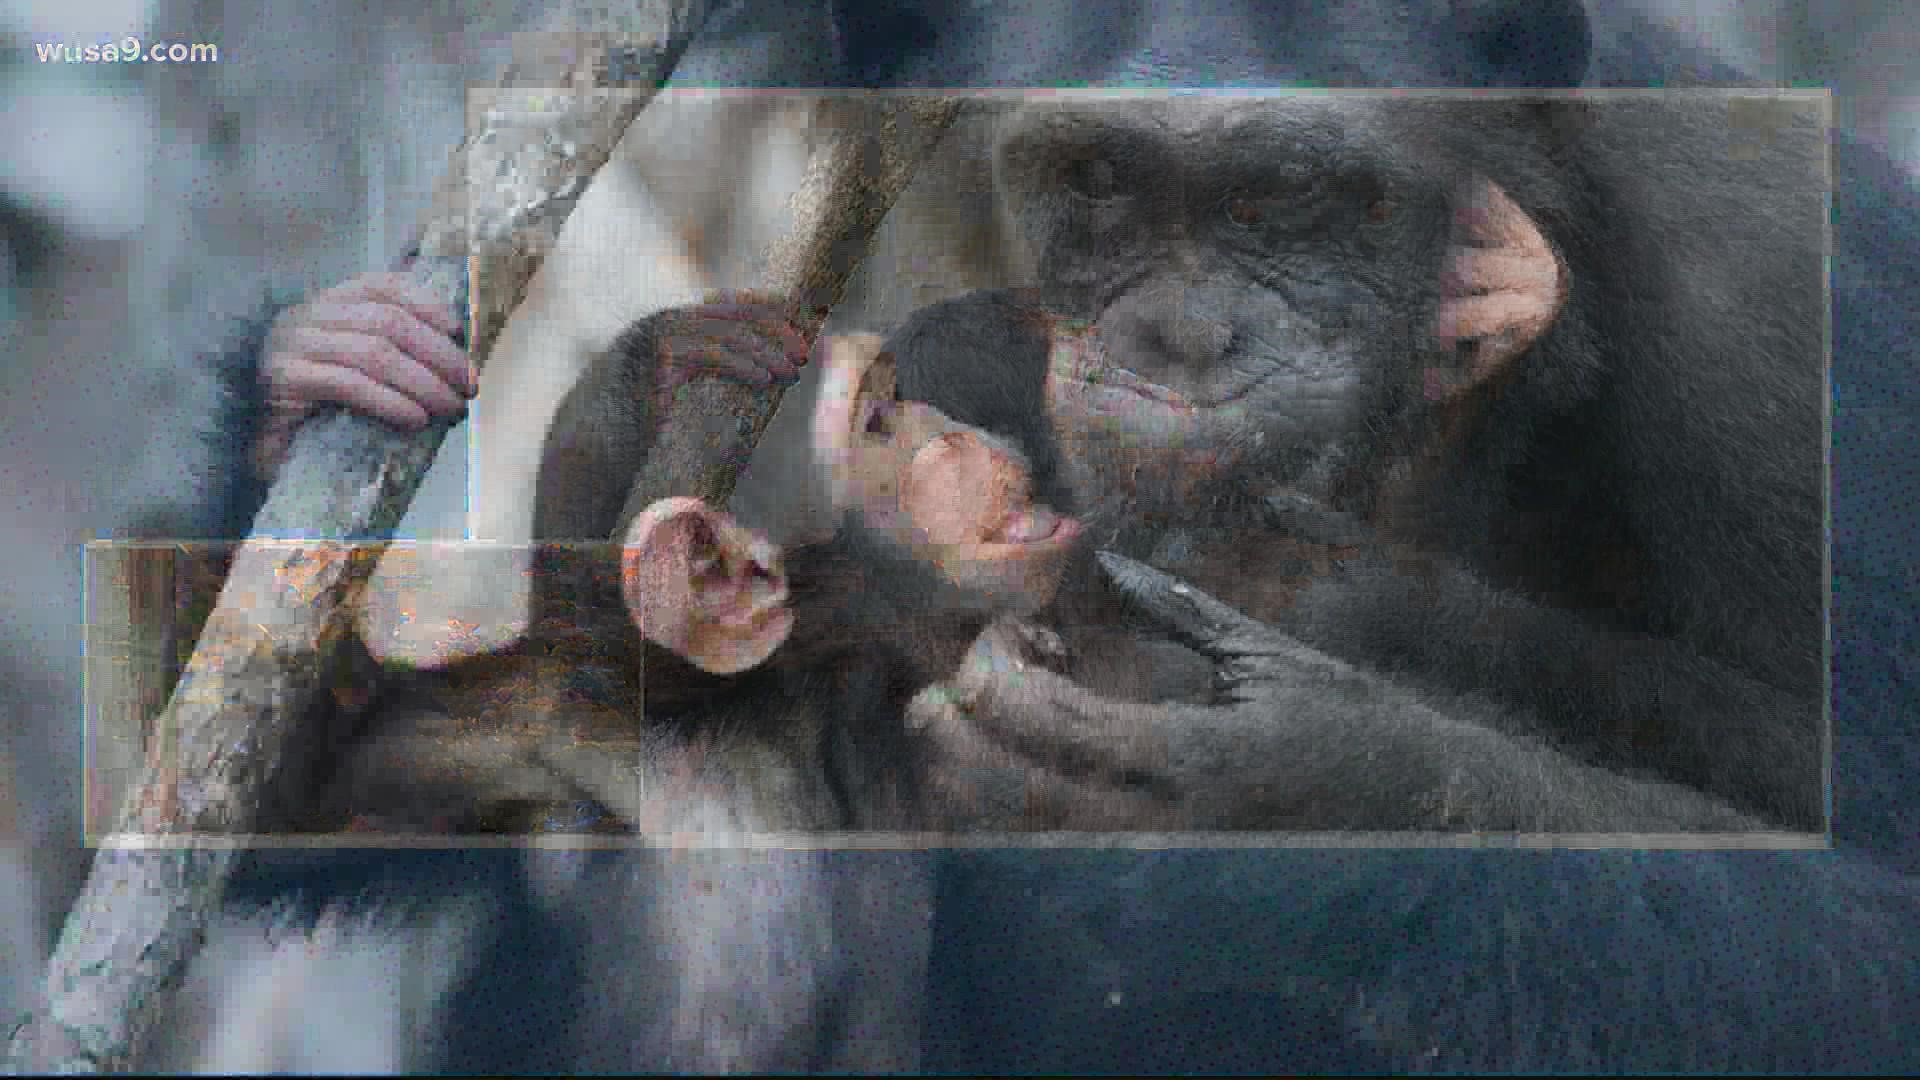 A new study found that apes exchange gestures to begin and end interactions.